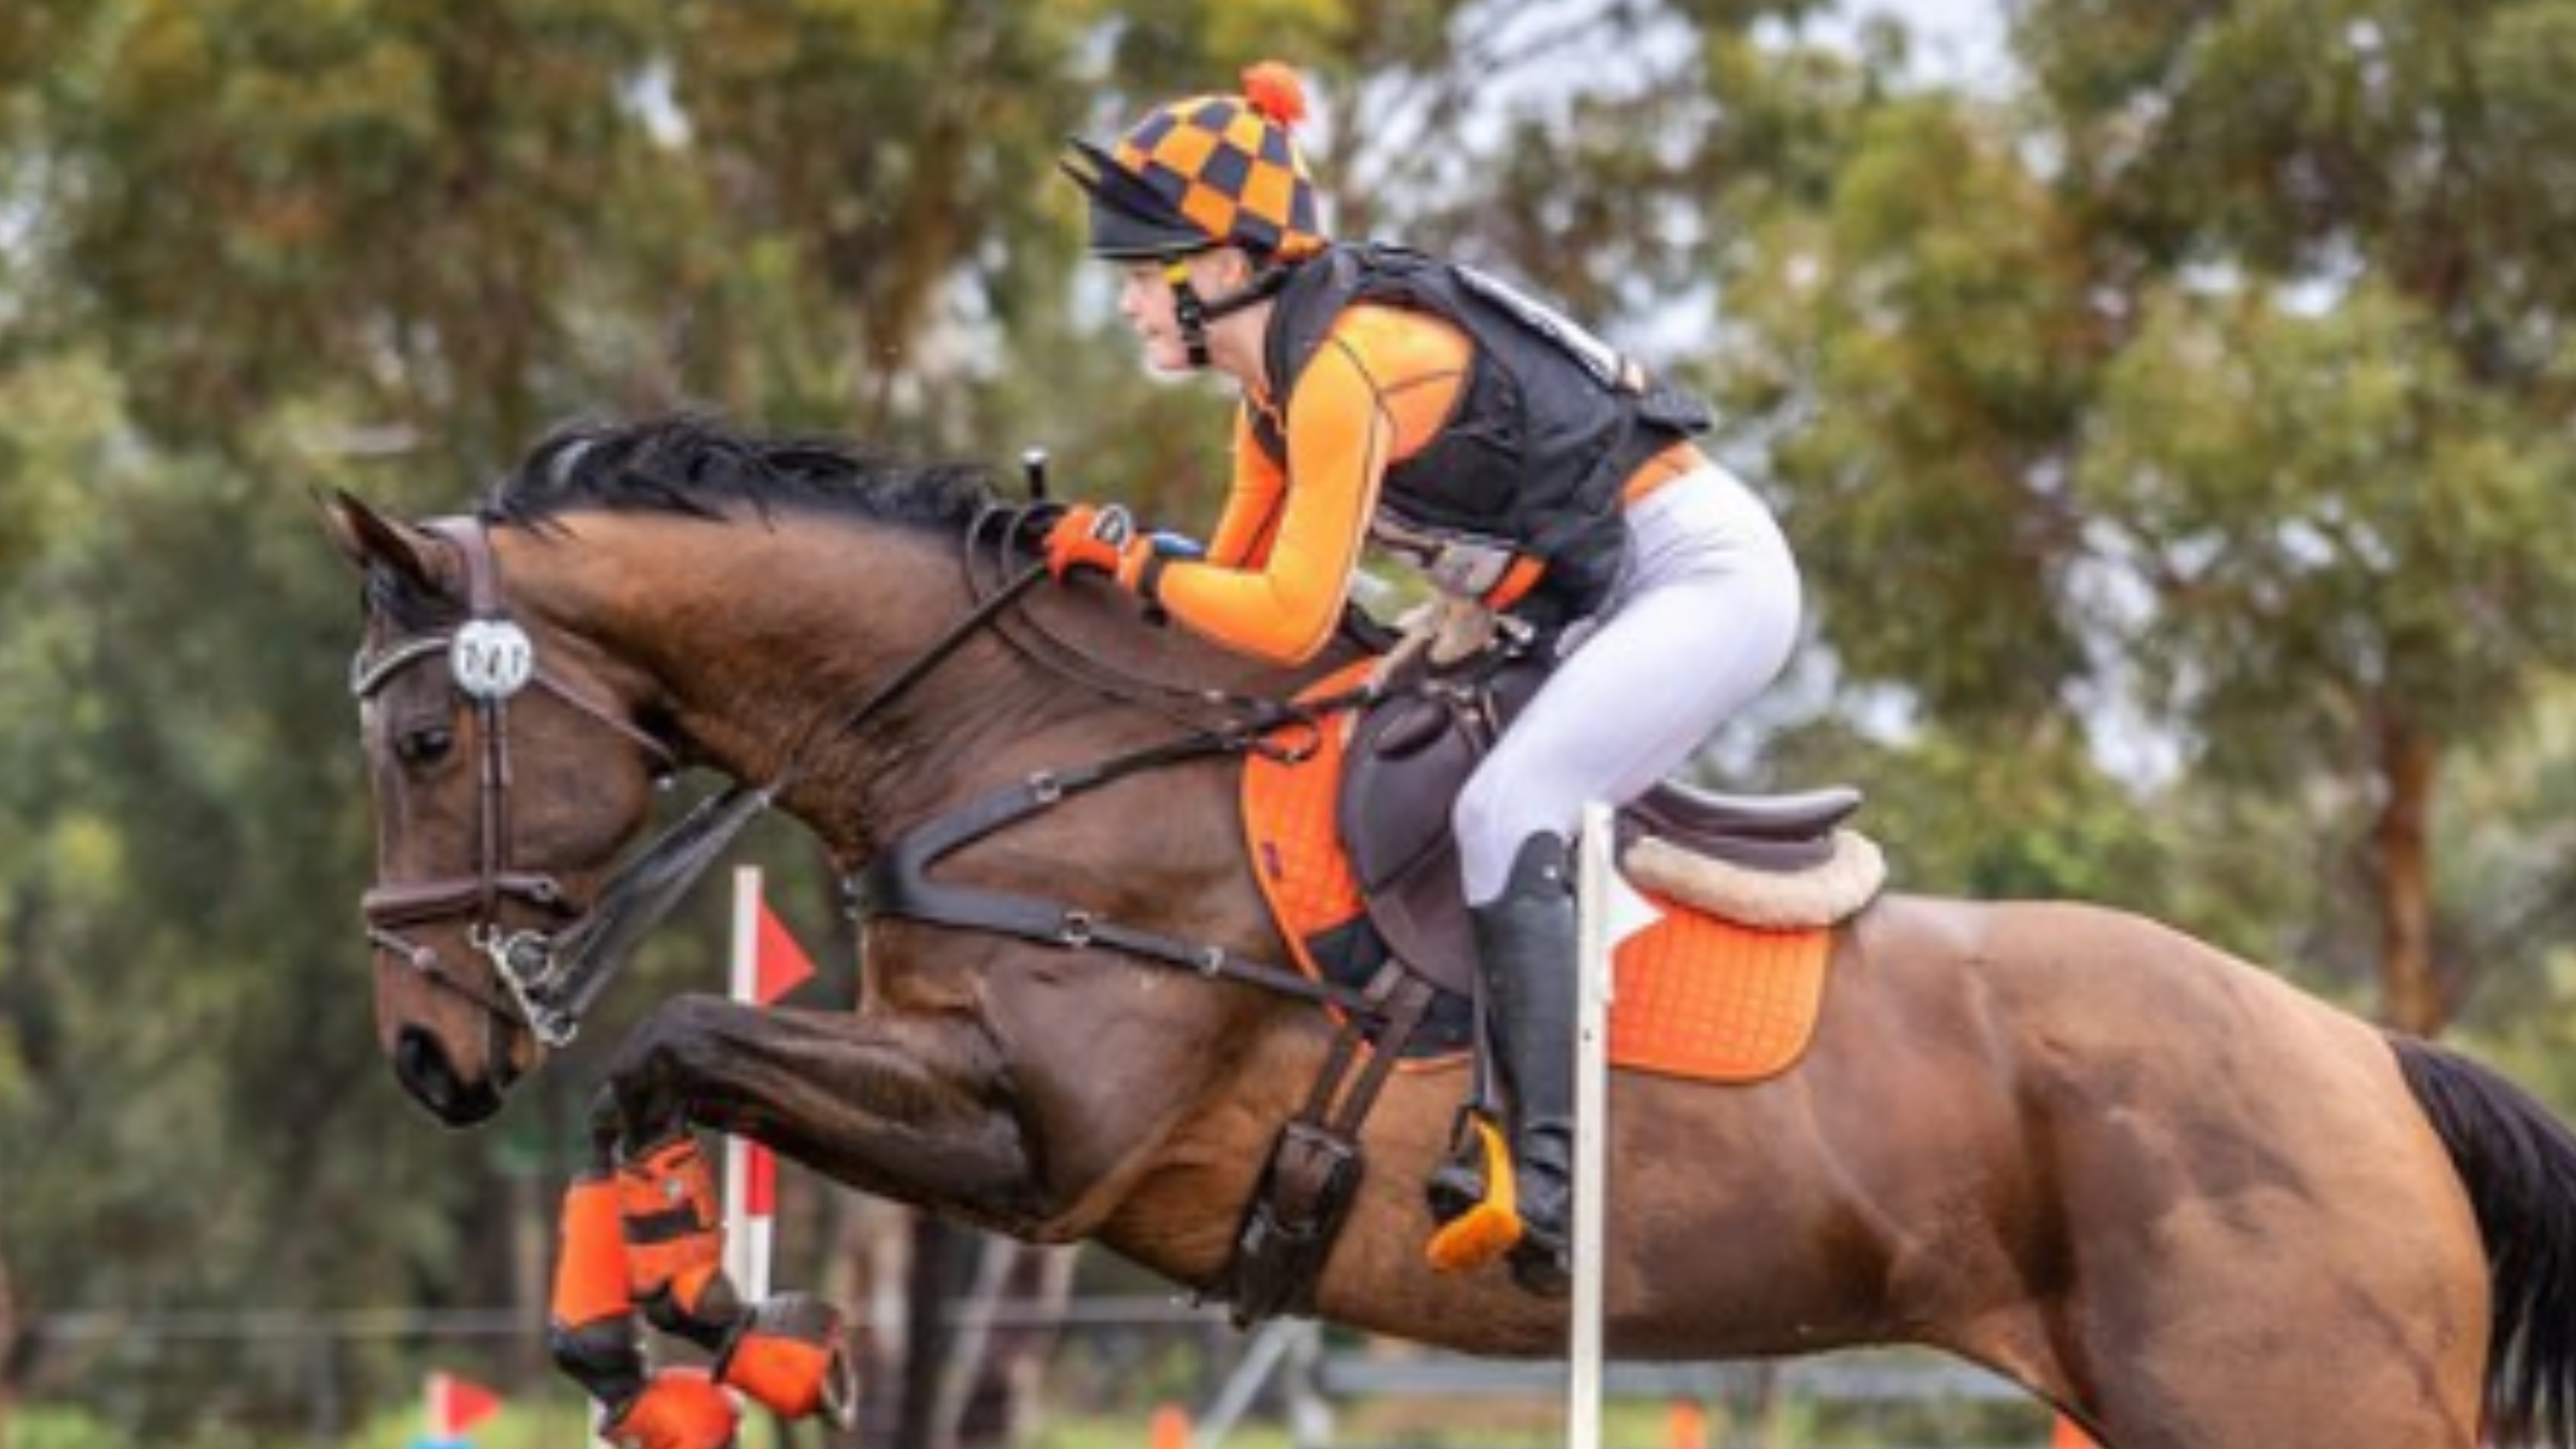 Powered by Provex, Hunter rides like a superstar thanks to Provex.